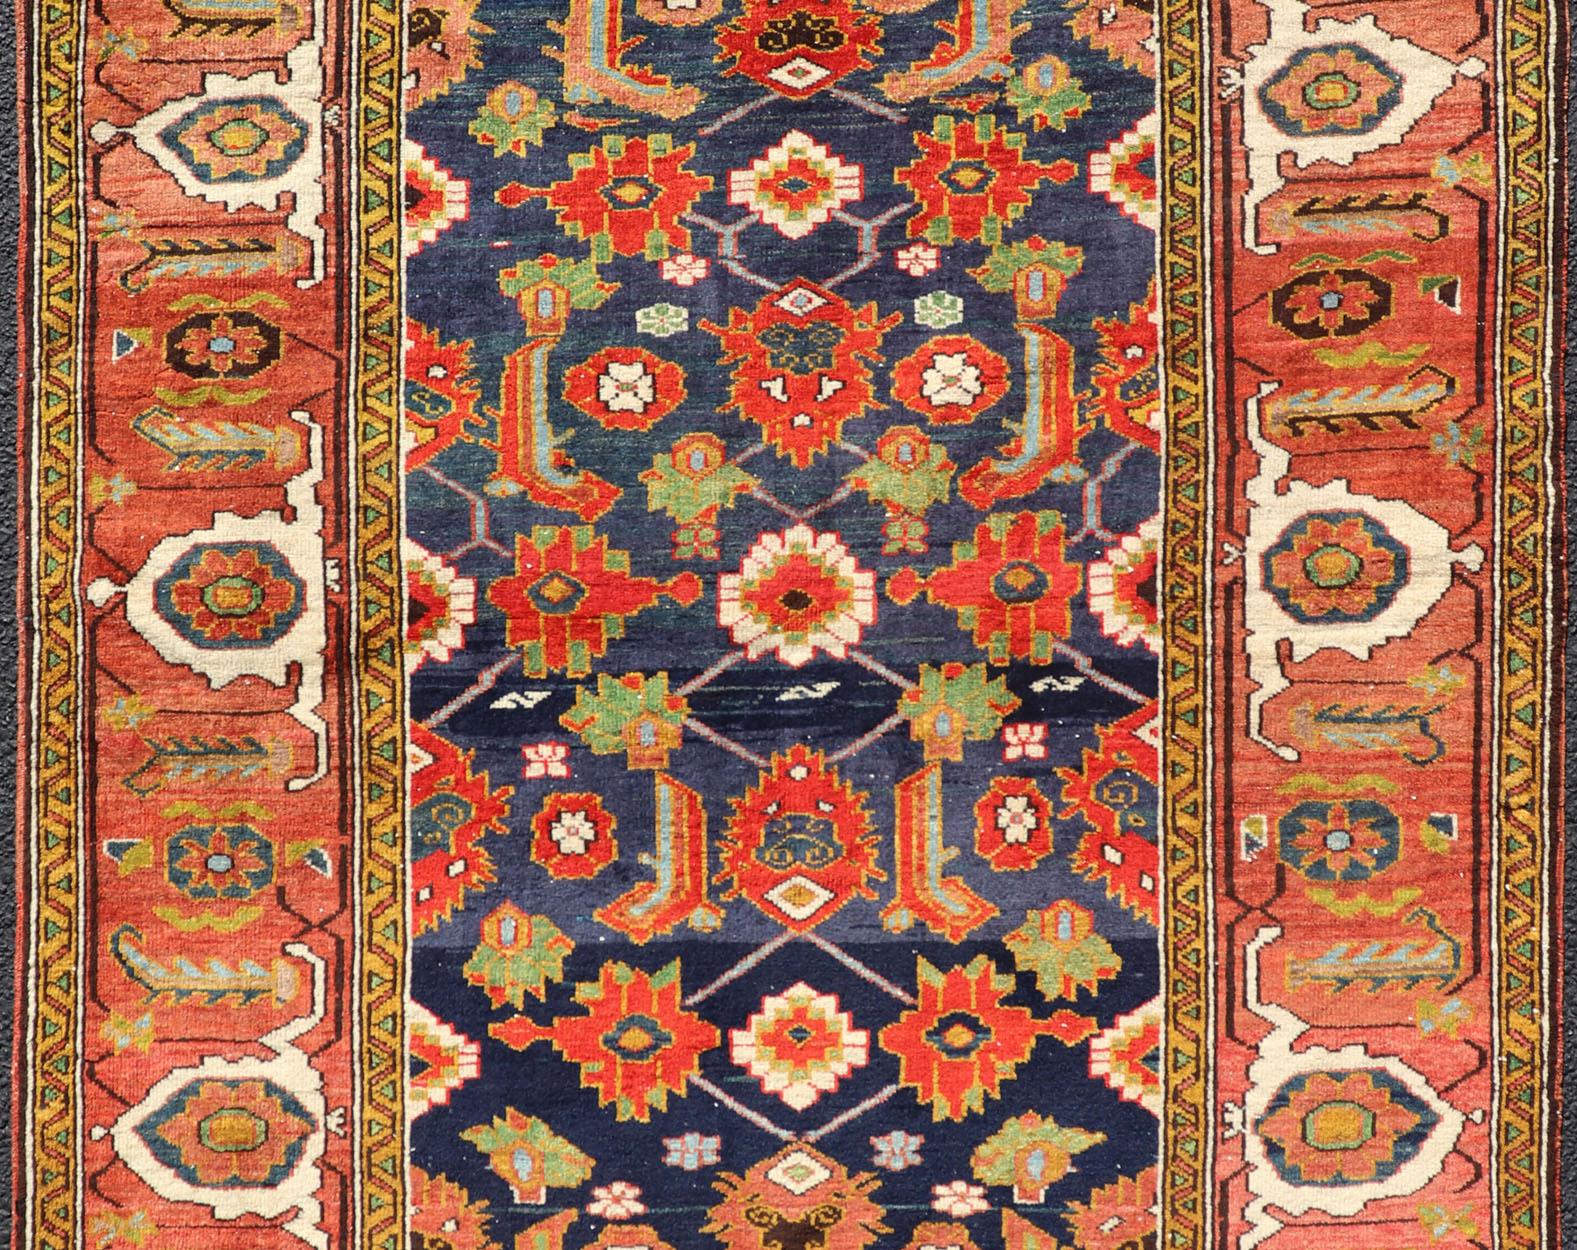 Antique Caucasian Rug with All-Over Design in Royal Blue Field, Soft Red & Green For Sale 3